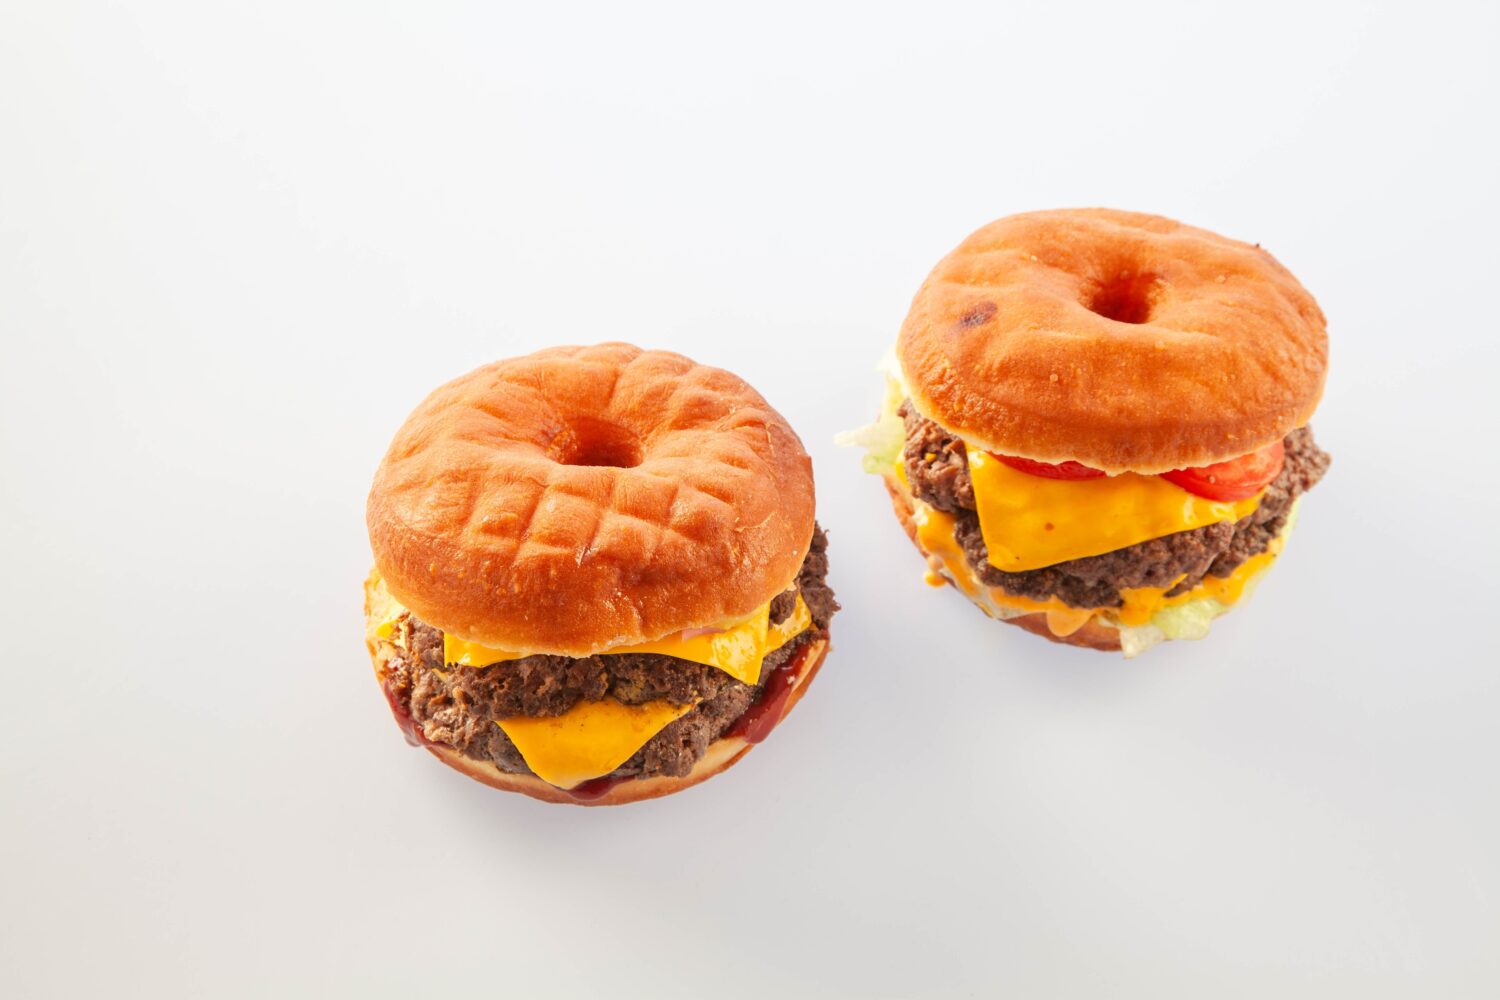 Two Brioche donut burgers deal meal